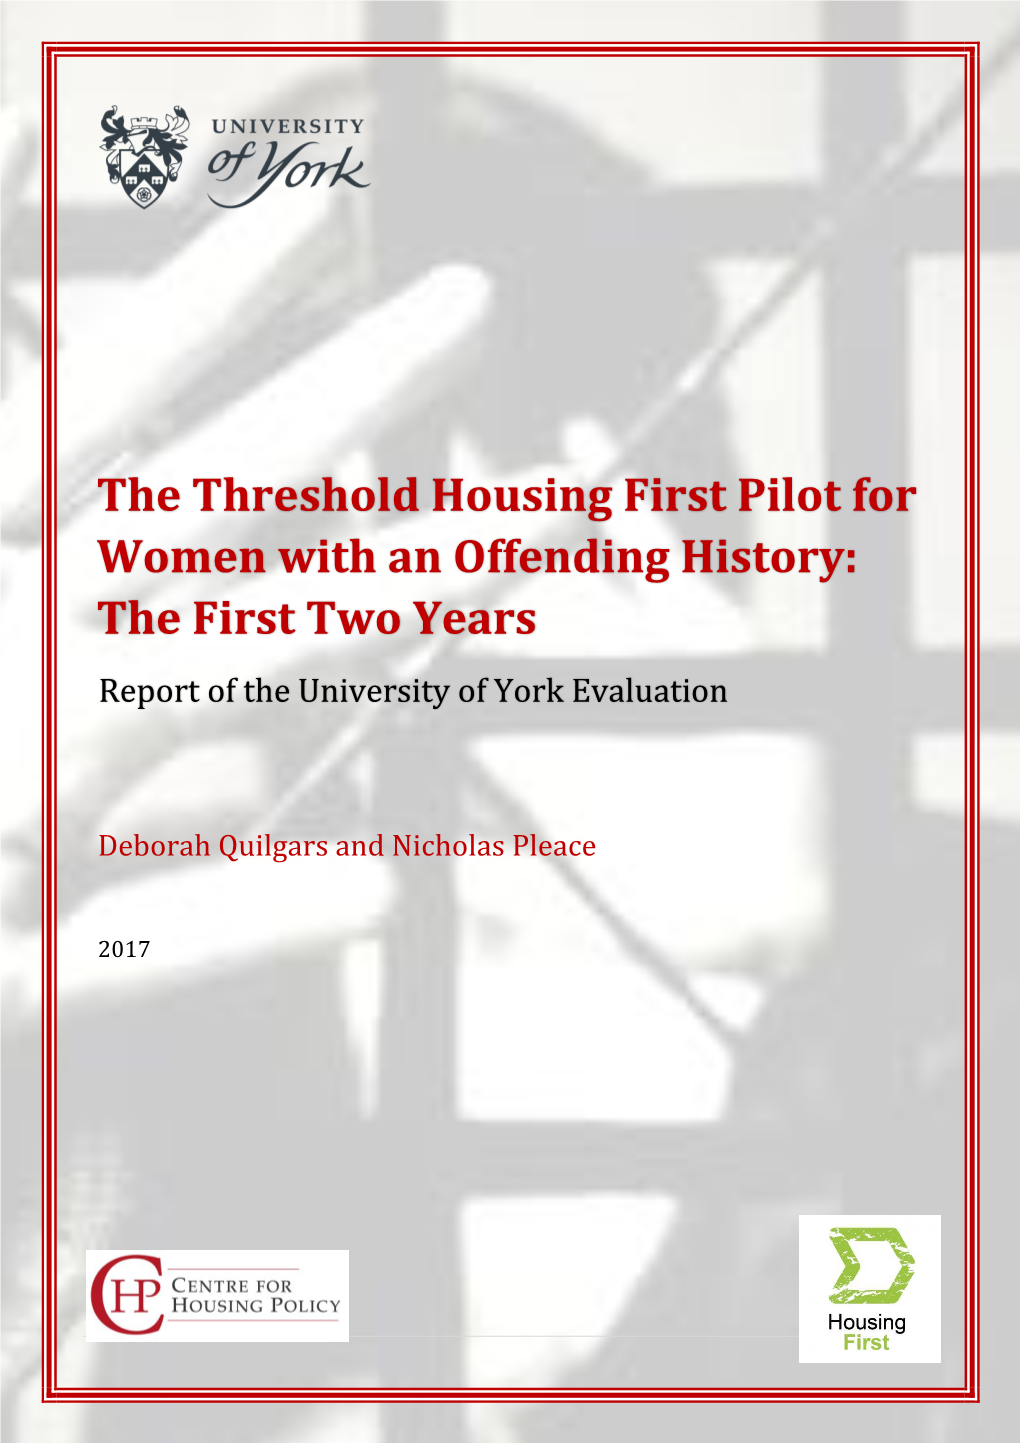 The Threshold Housing First Pilot for Women with an Offending History: the First Two Years